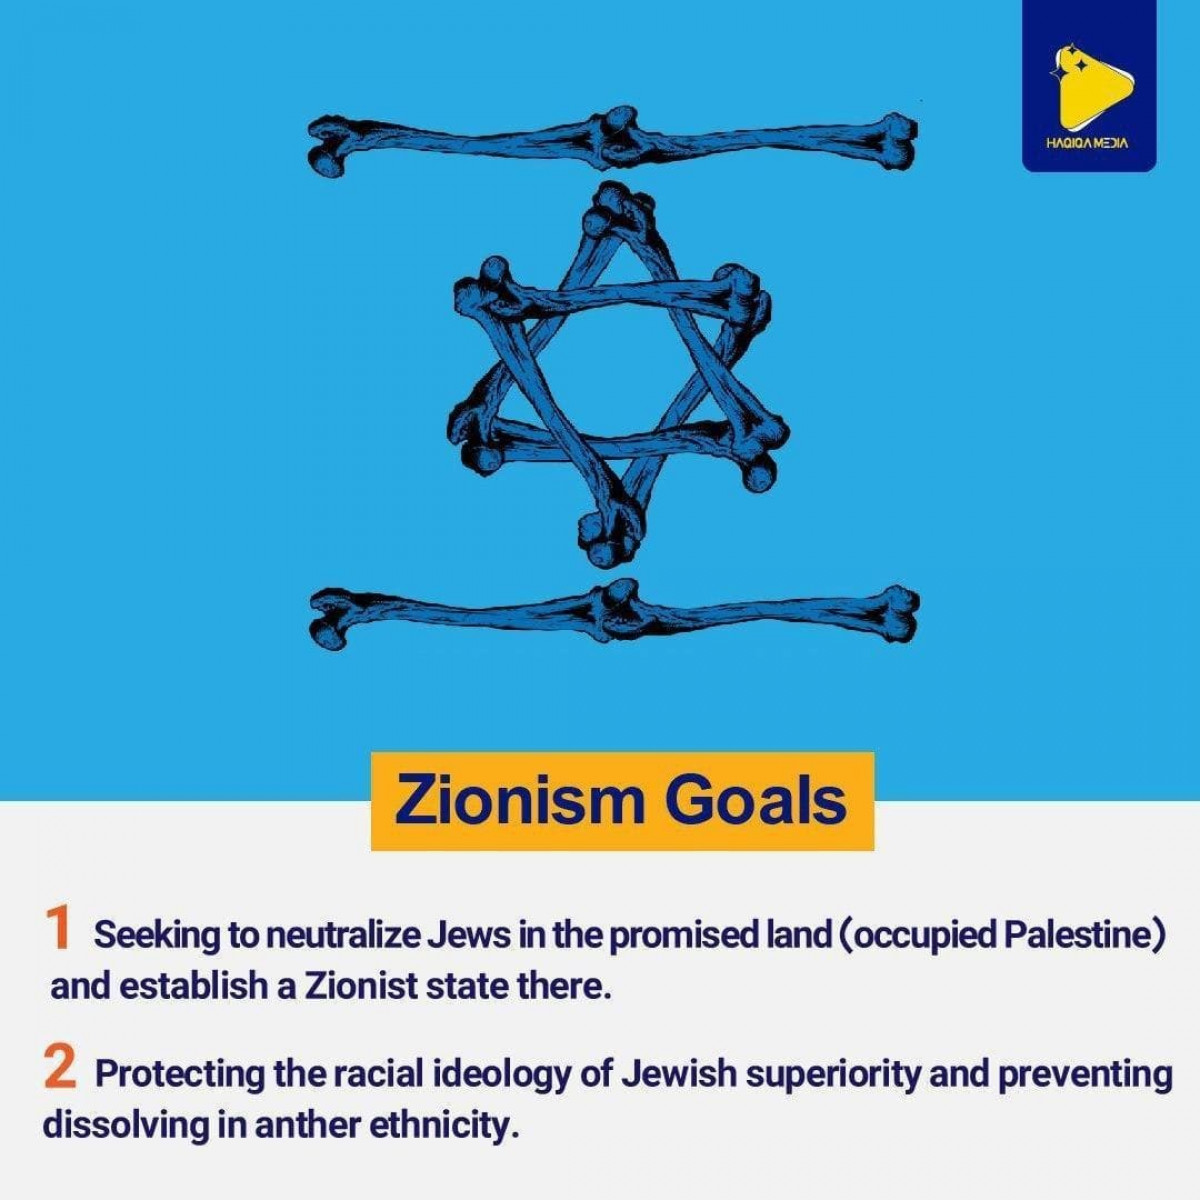 Collection of posters: Zionism Goals